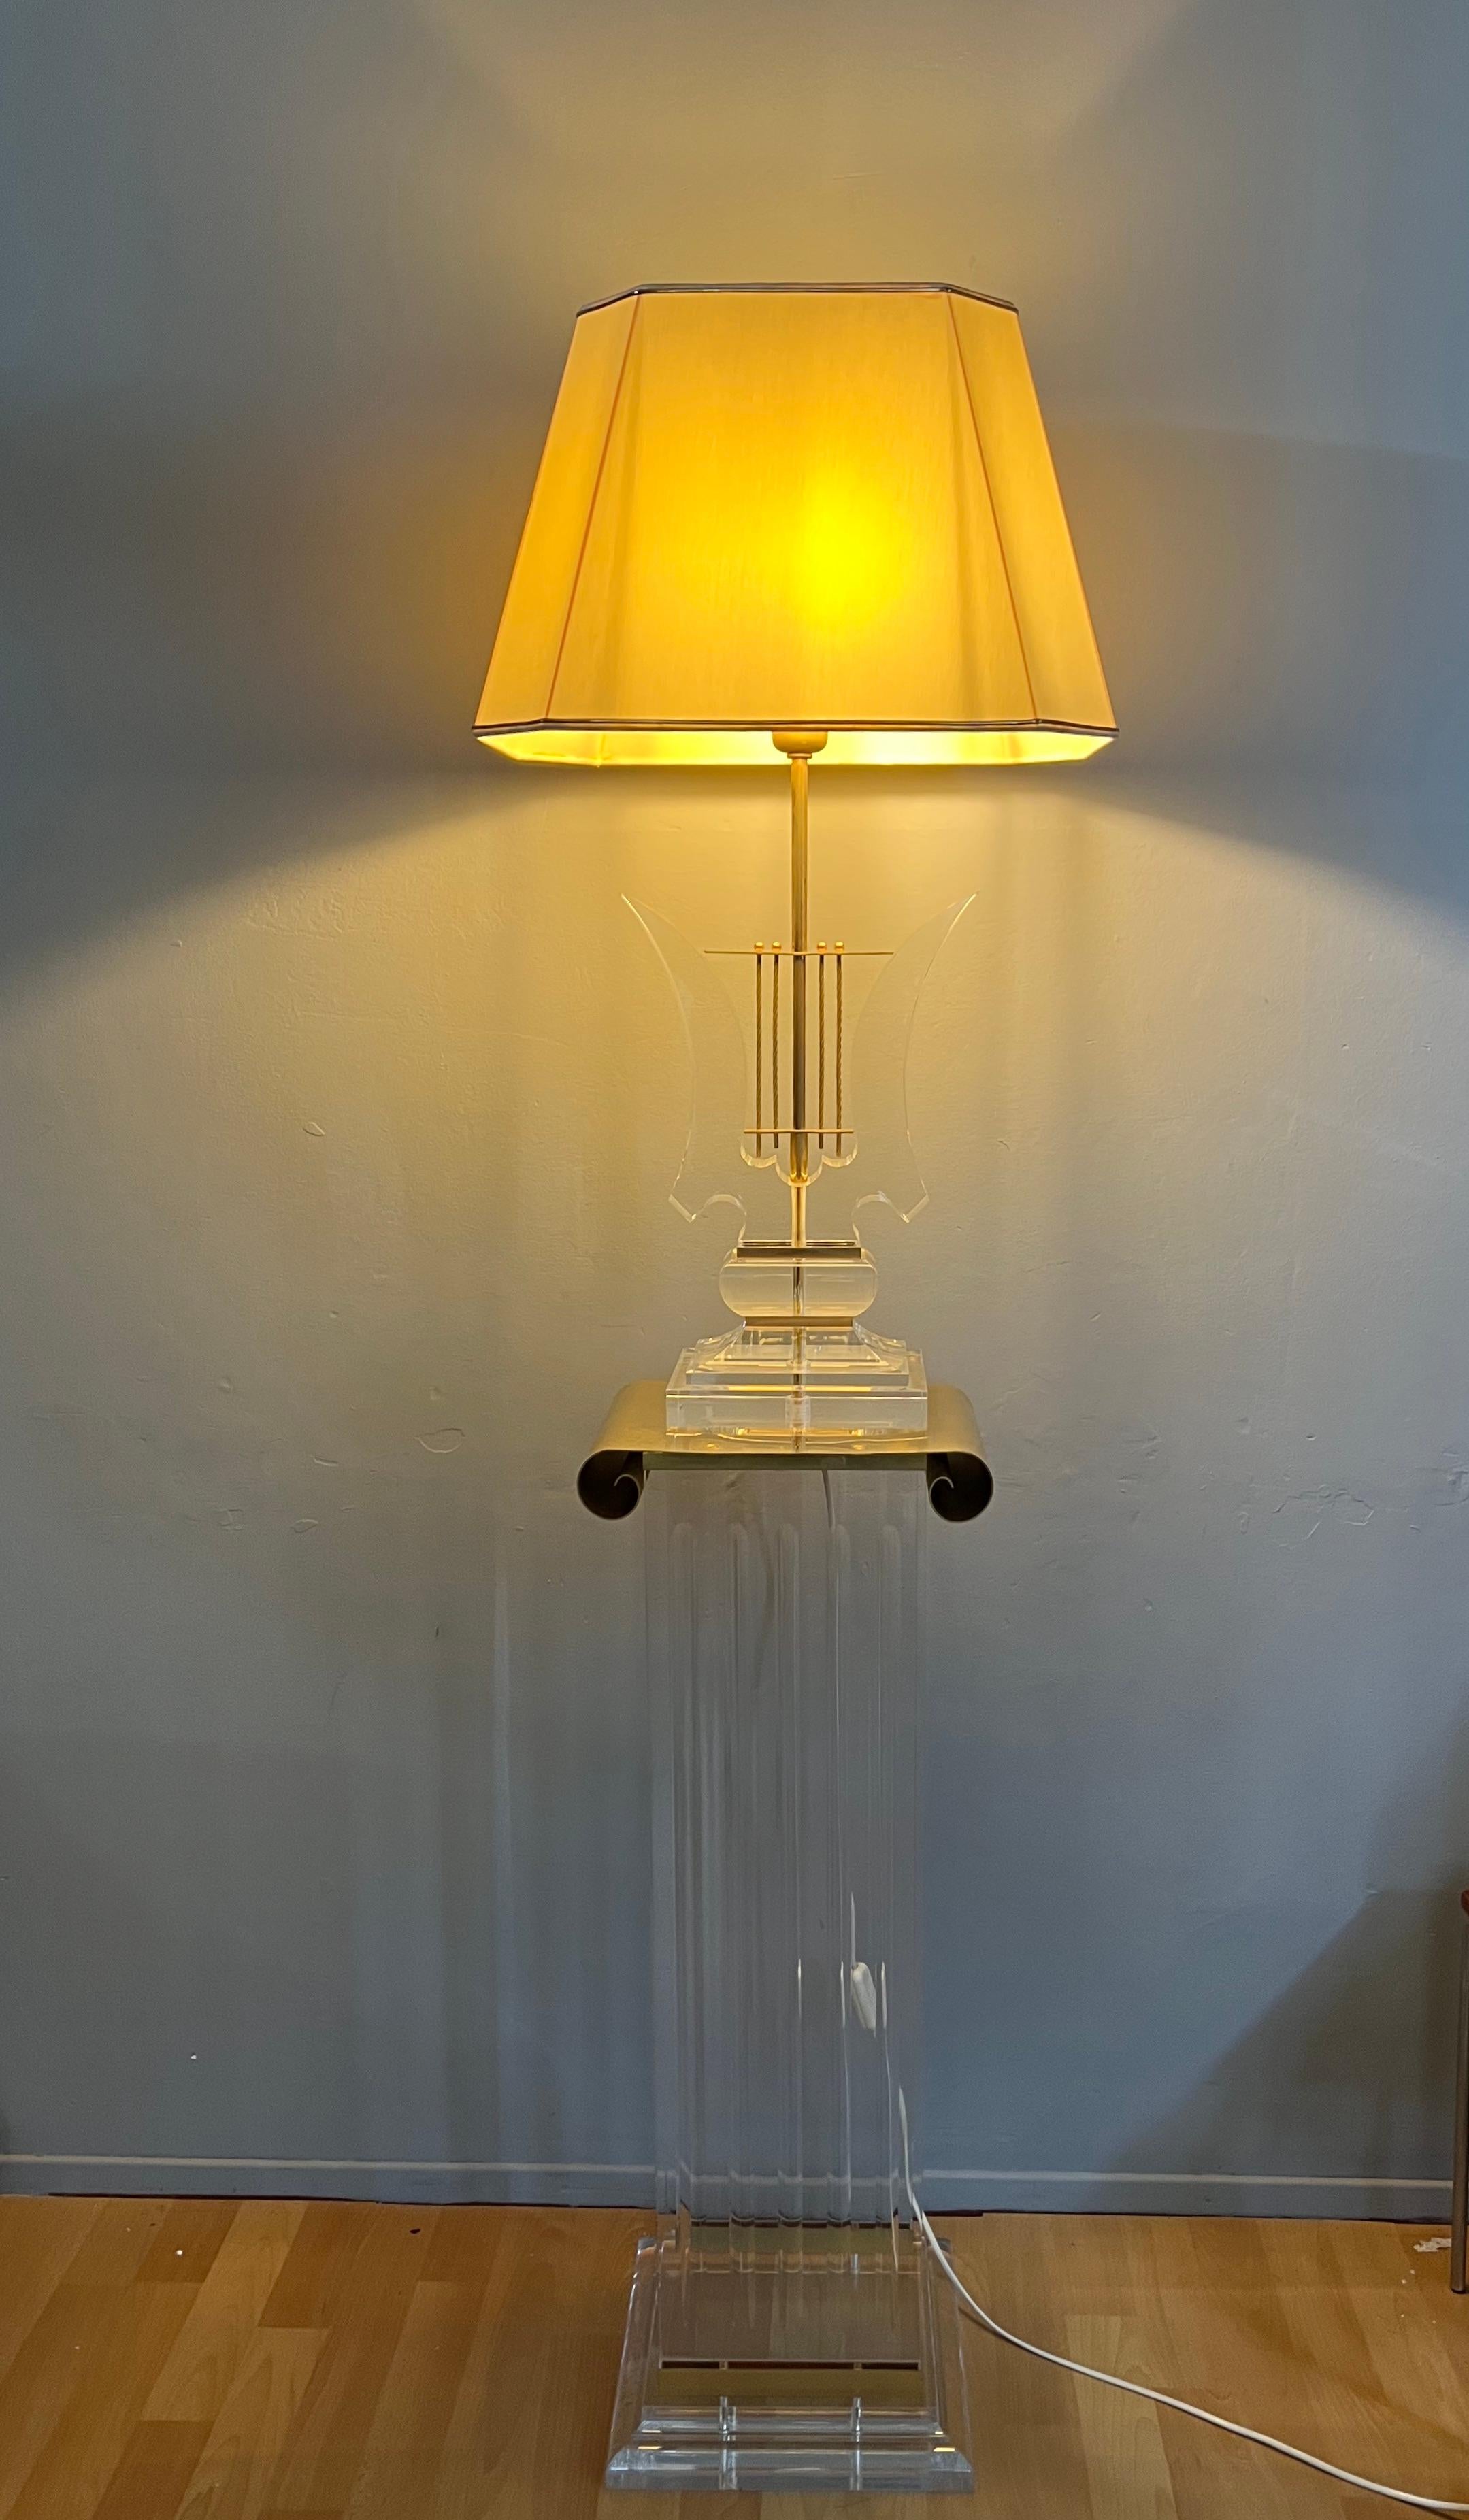 Rare and completely original set creating a Hollywood Regency floor lamp.

This exceptionally beautiful and what we believe to be a very rare set of a midcentury pedestal with a matching, harp design table lamp in the Hollywood Regency style is